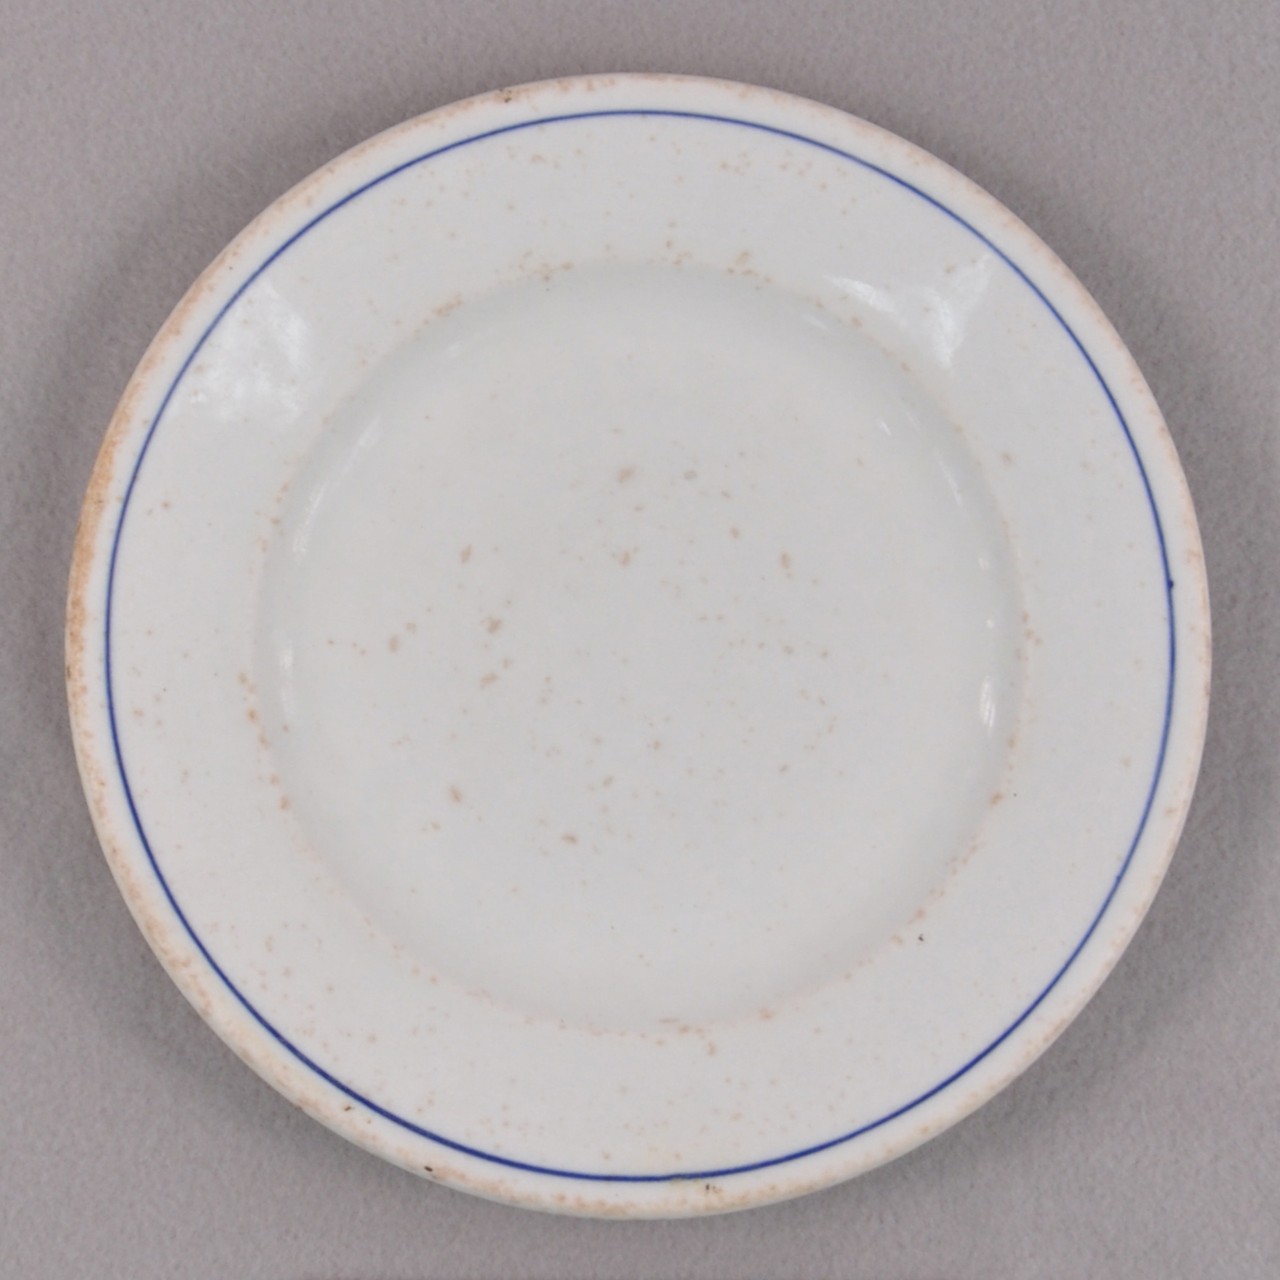 <p>A white glazed stoneware plate recovered from USS San Diego with a blue line border around its edge.</p>